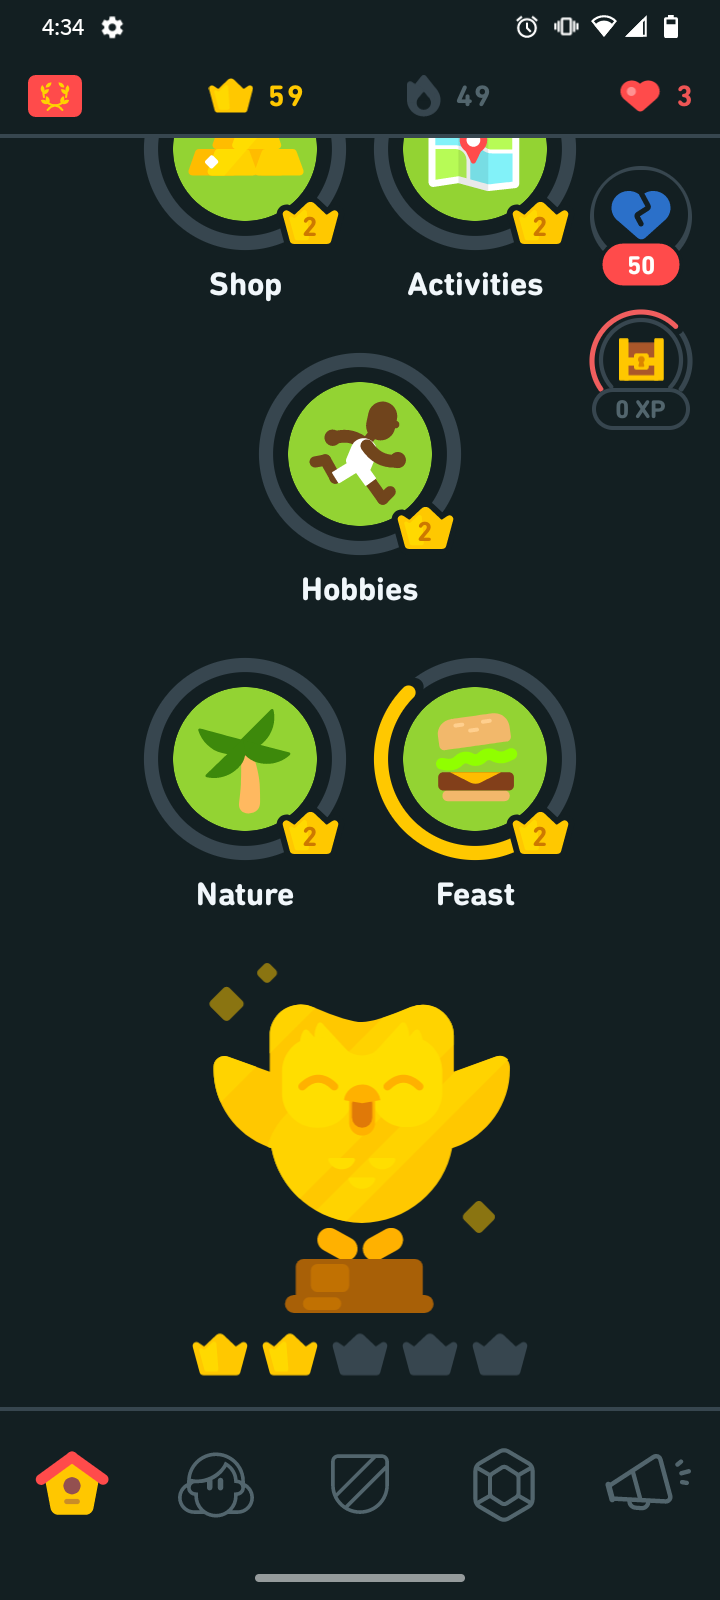 The bottom of a Duolingo language skill tree, featuring the Golden Owl and two completed crown levels.